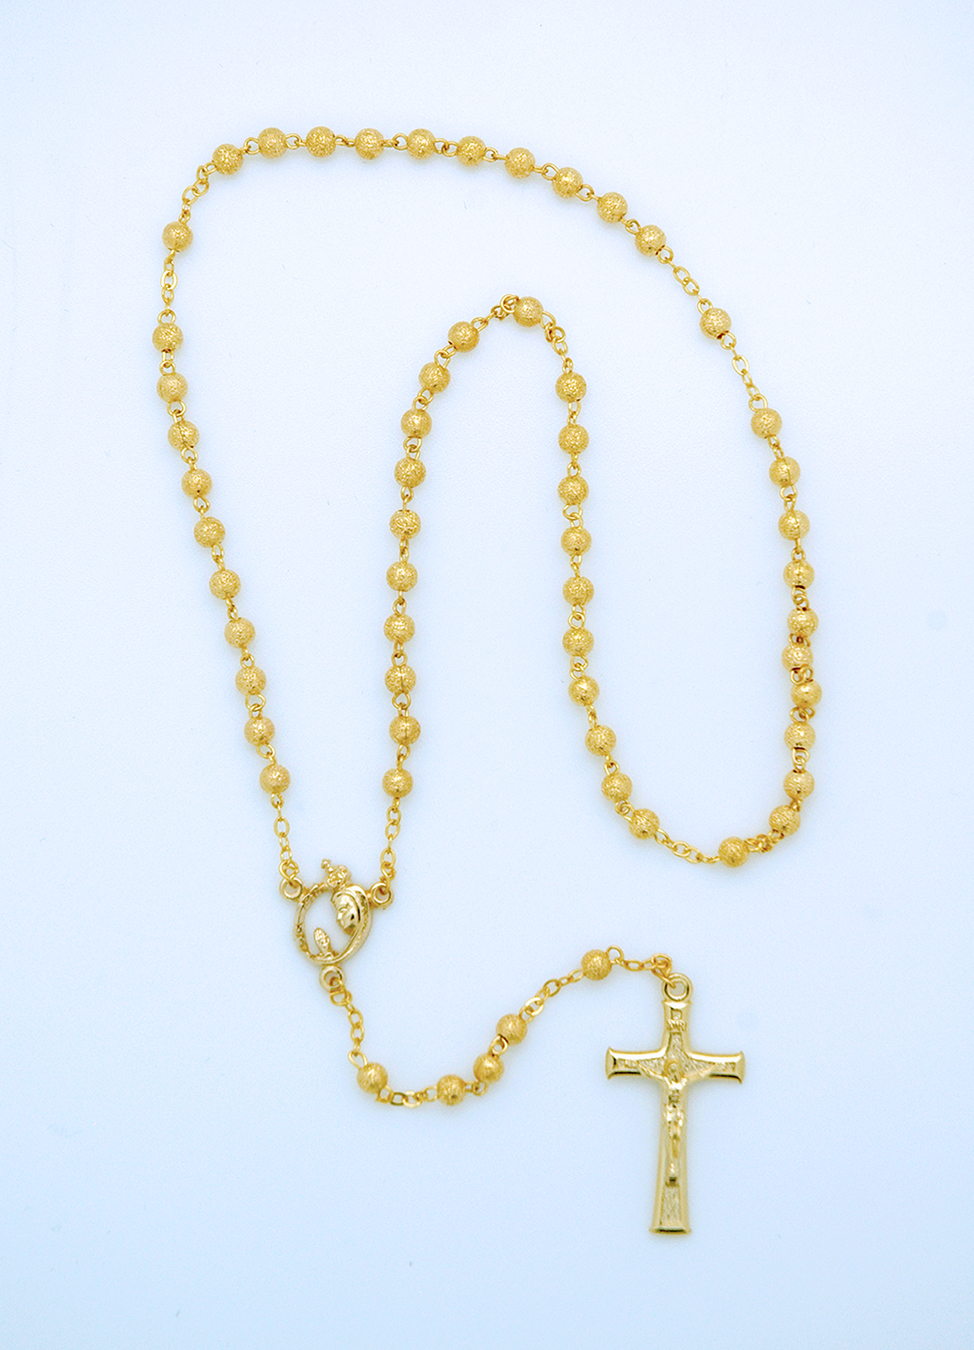 P984D - 4 mm. Gold Stardust Metal Rosary from Fatima